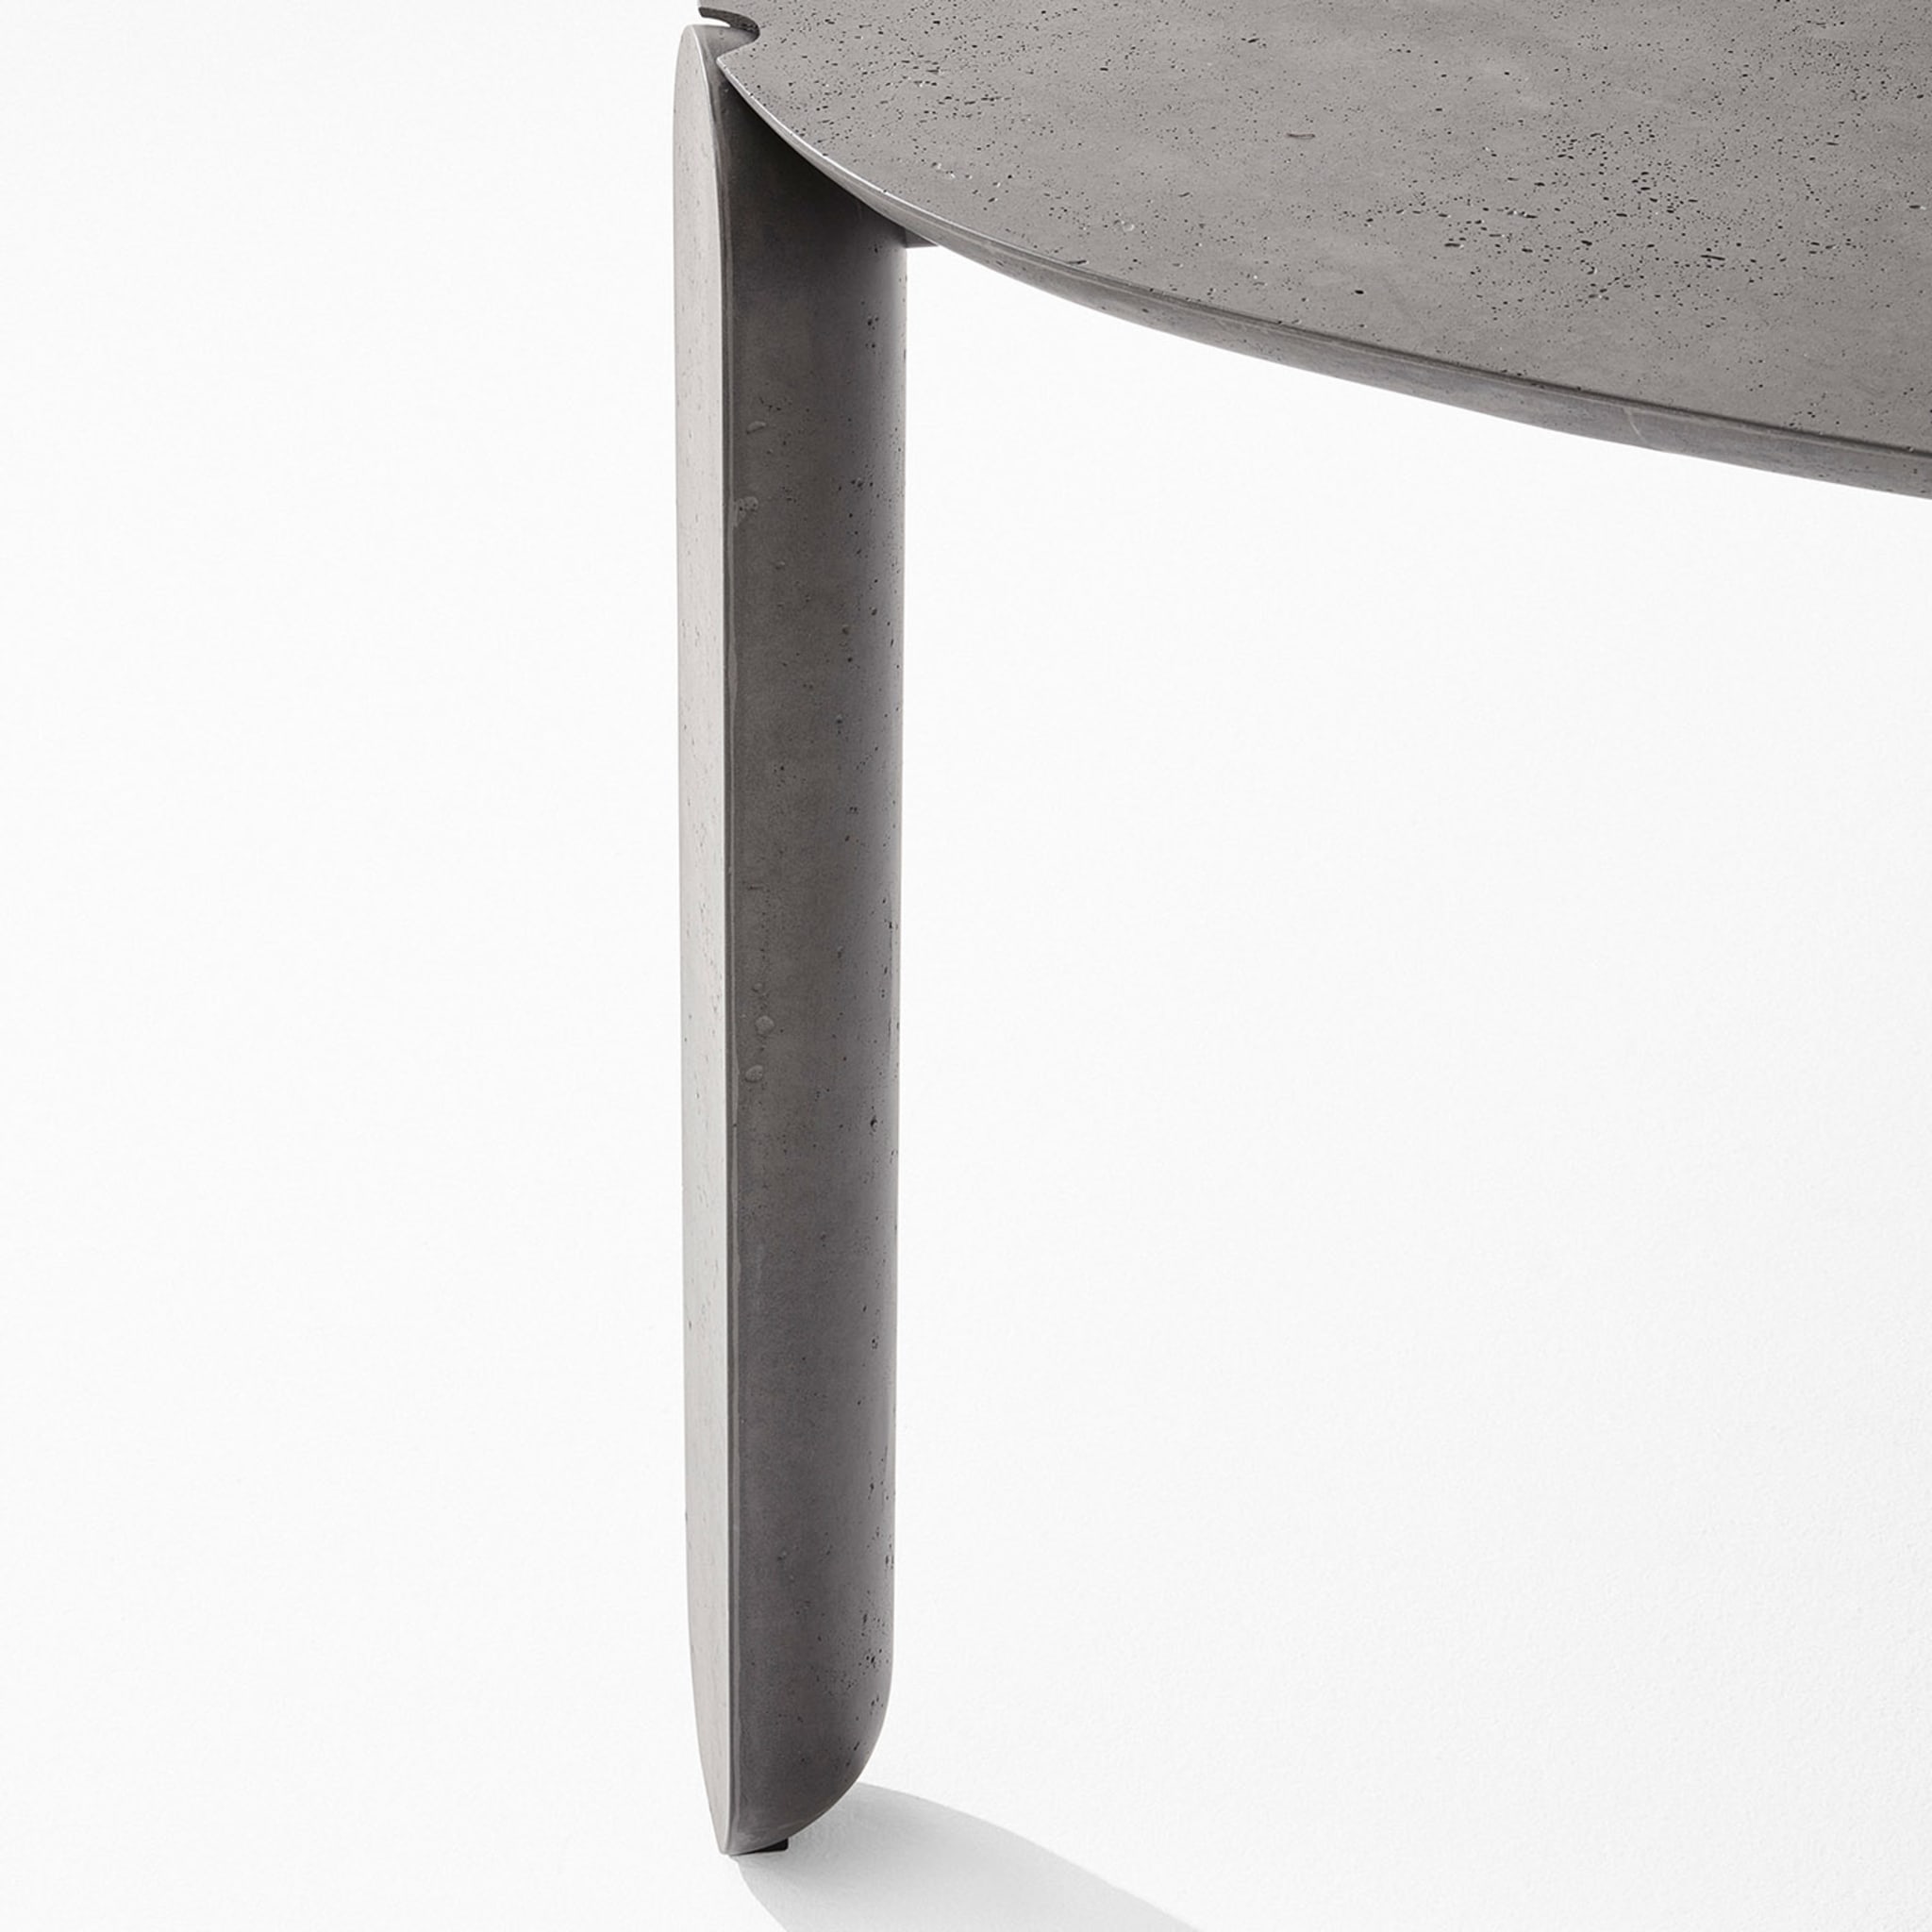 Lido Table by Parisotto and Formenton - Alternative view 1